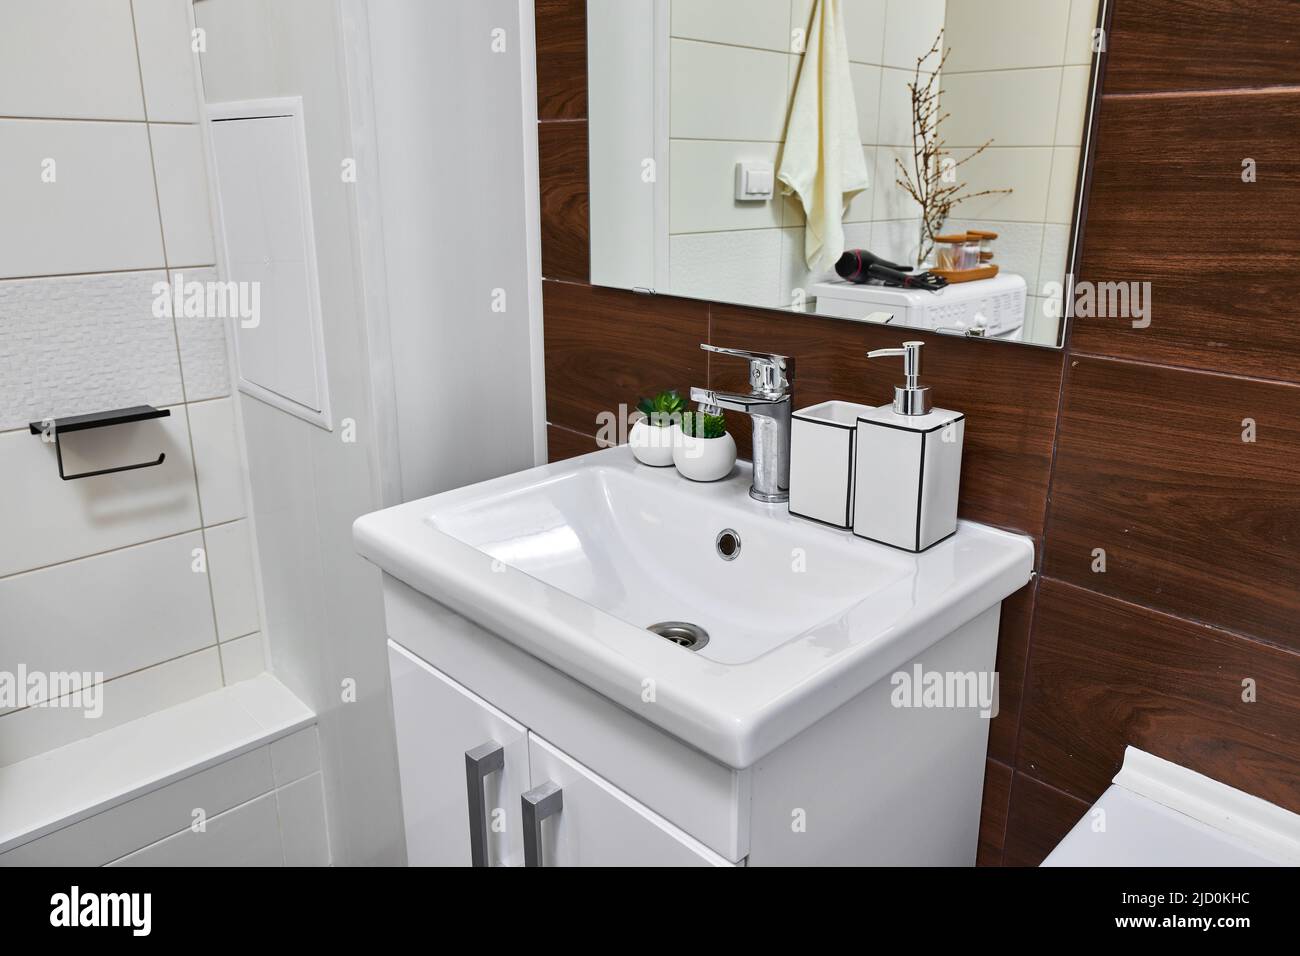 Photo of the bathroom and interior details  Stock Photo